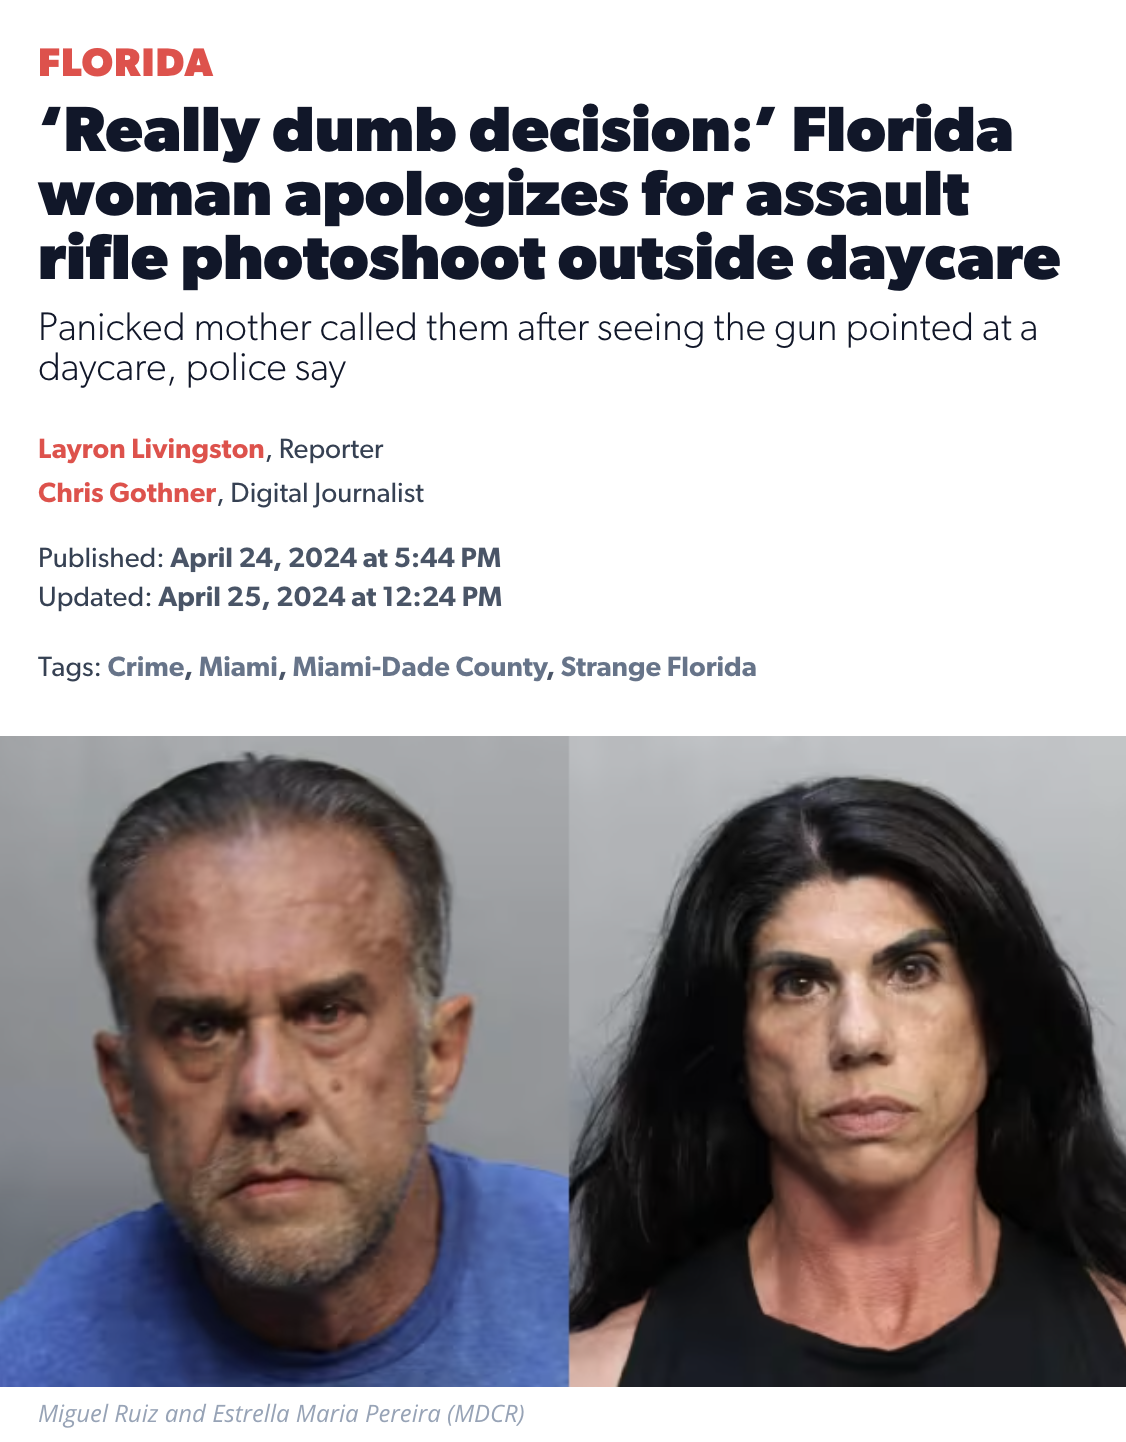 miguel ruiz and estrella pereira - Florida 'Really dumb decision' Florida woman apologizes for assault rifle photoshoot outside daycare Panicked mother called them after seeing the gun pointed at a daycare, police say Layron Livingston, Reporter Chris Got